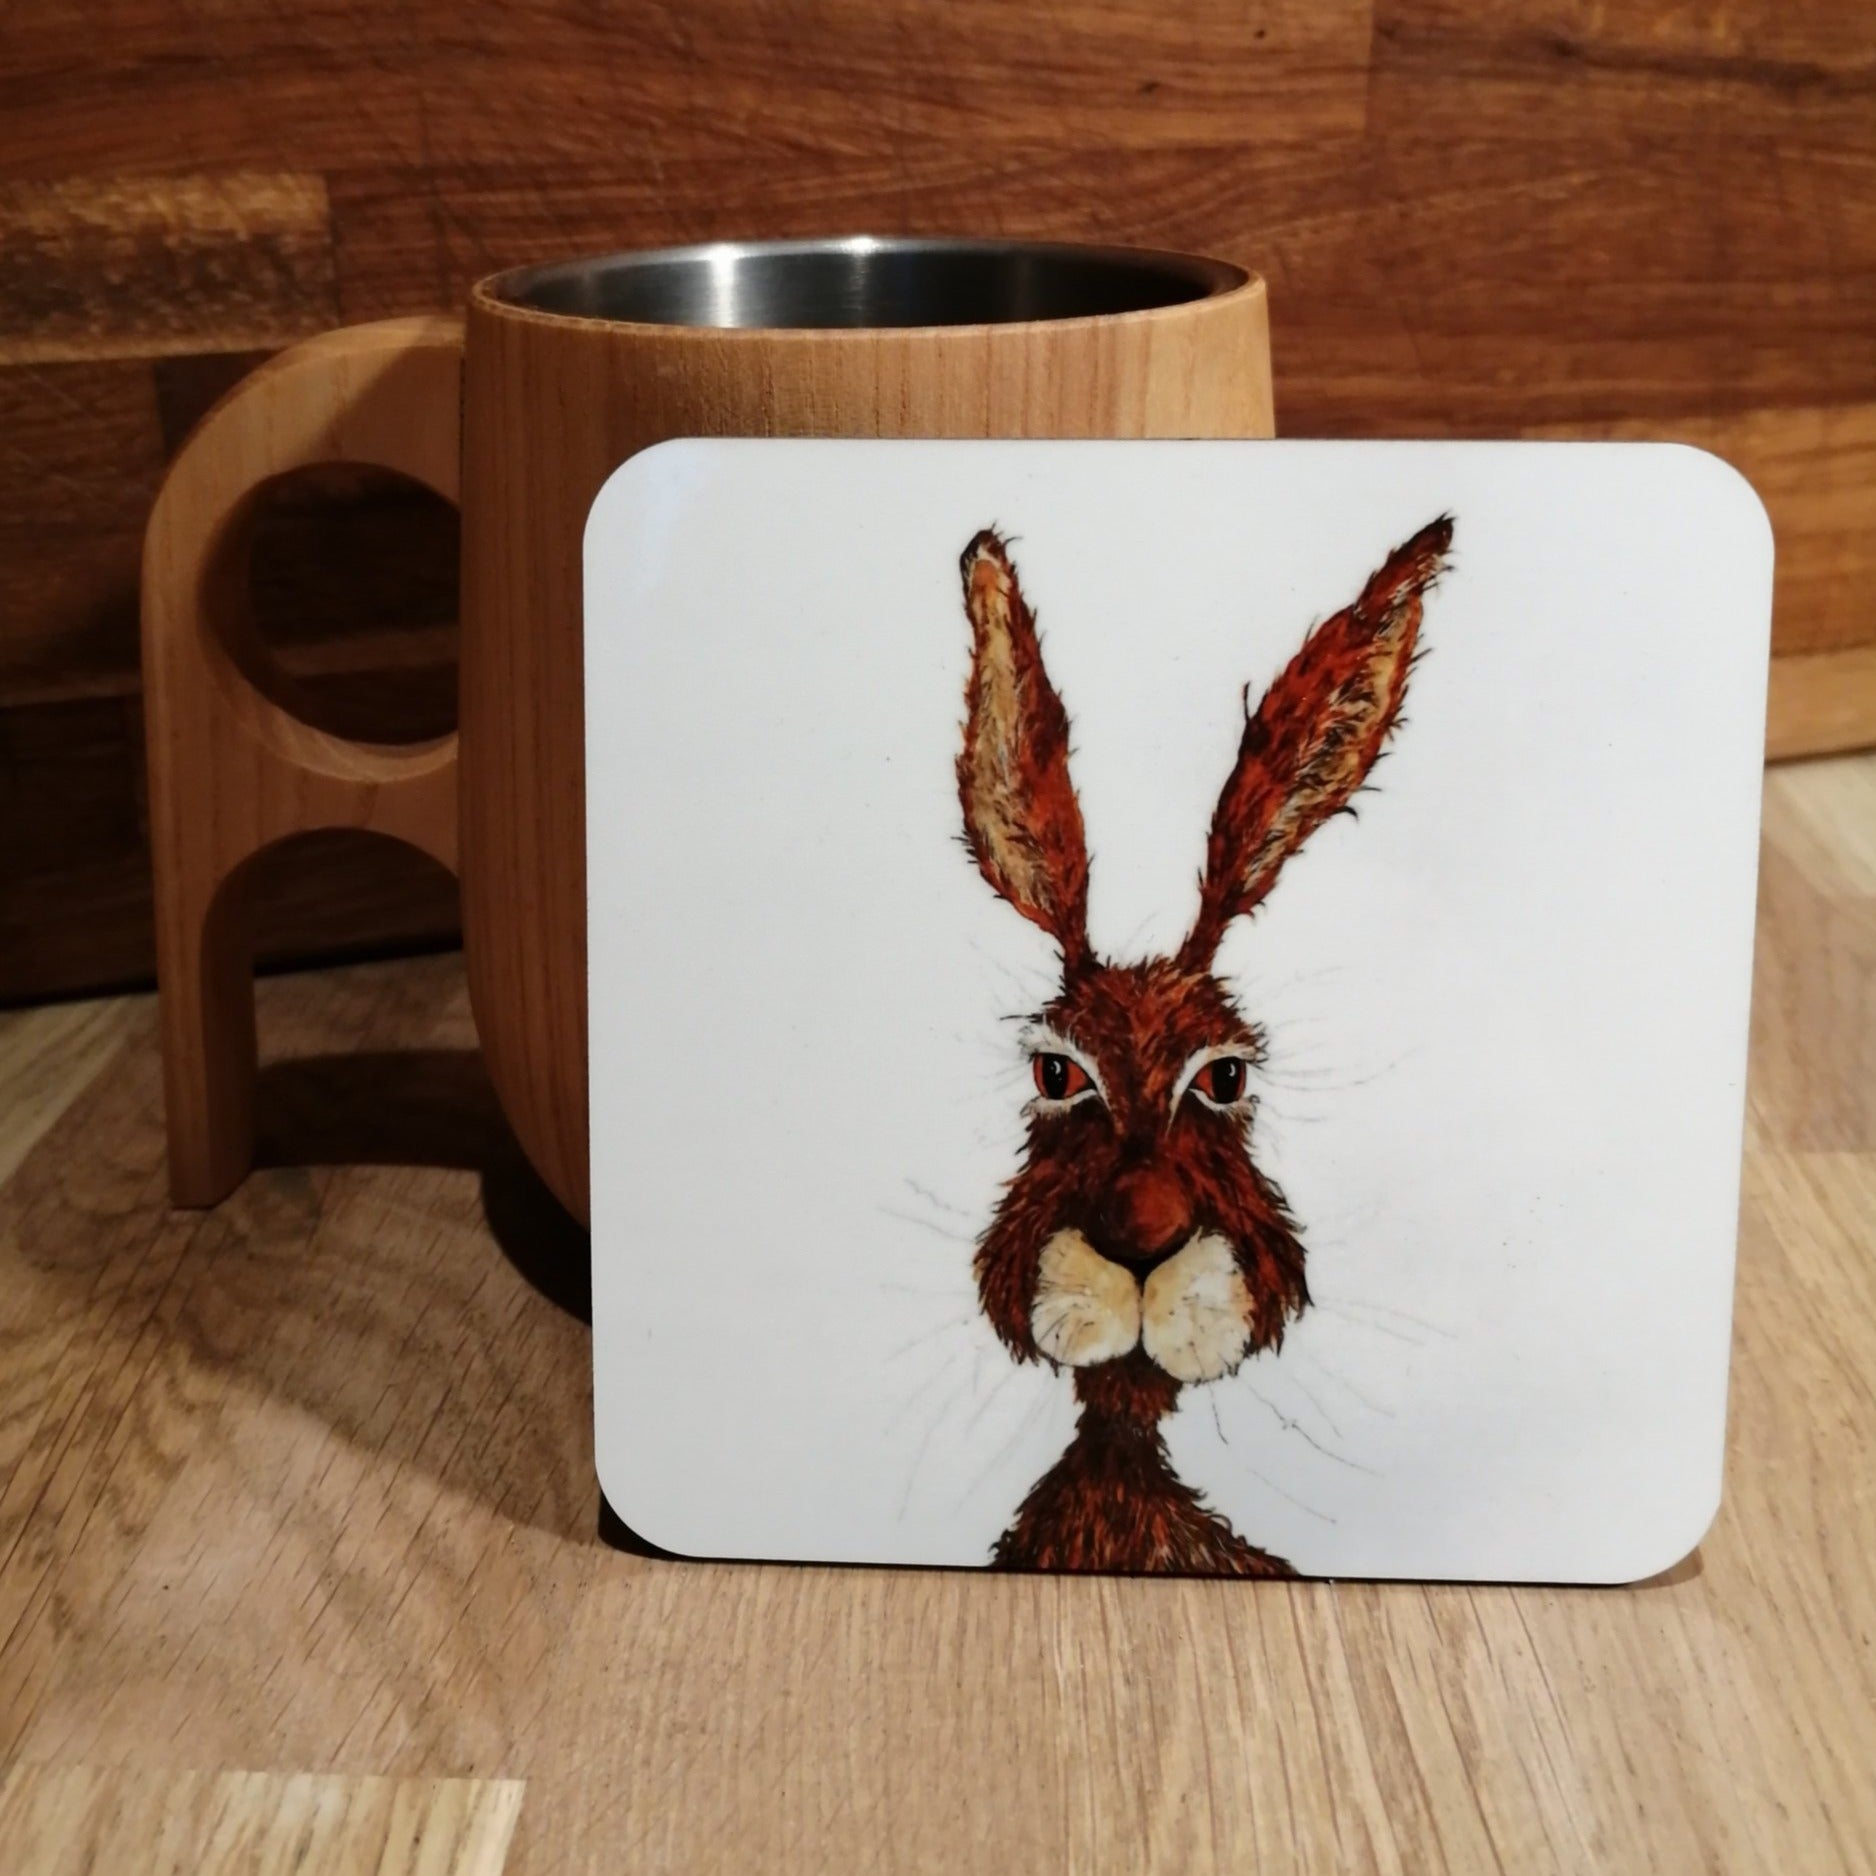 Twinkle the Hare Coaster